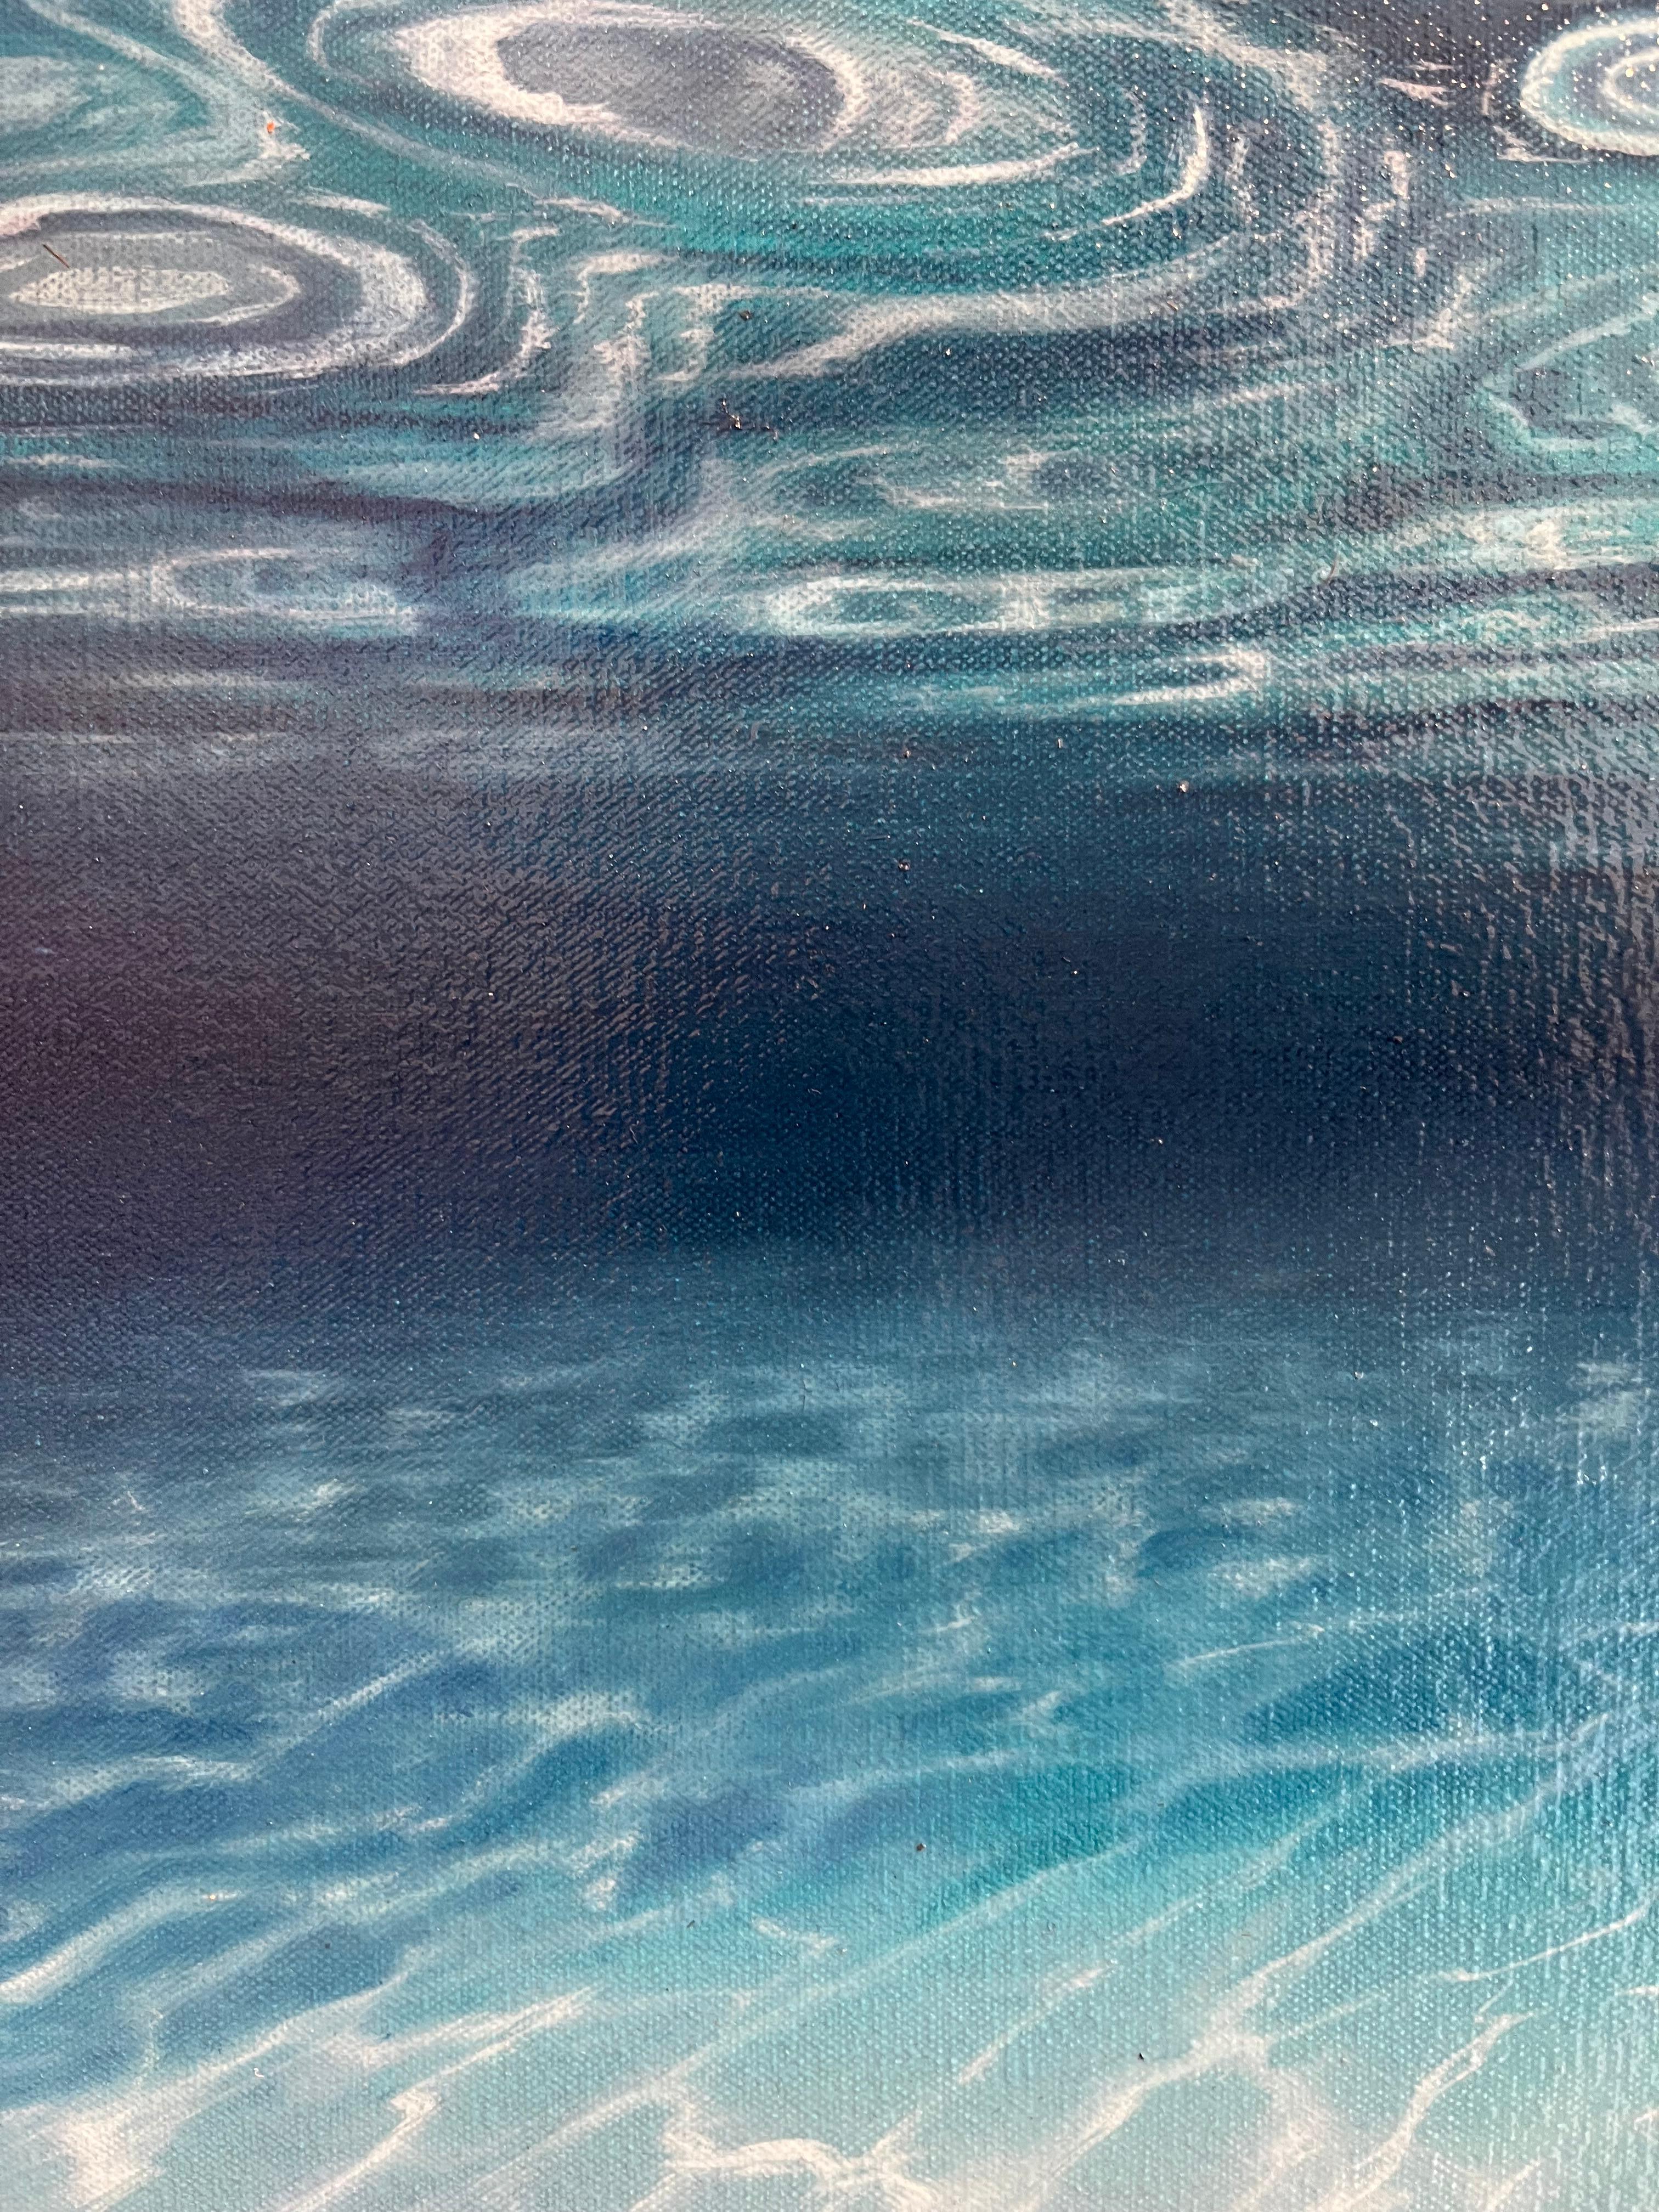 Deep Blue - water study realism seascape original modern oil painting photo real - Realist Painting by Leavon Bowman